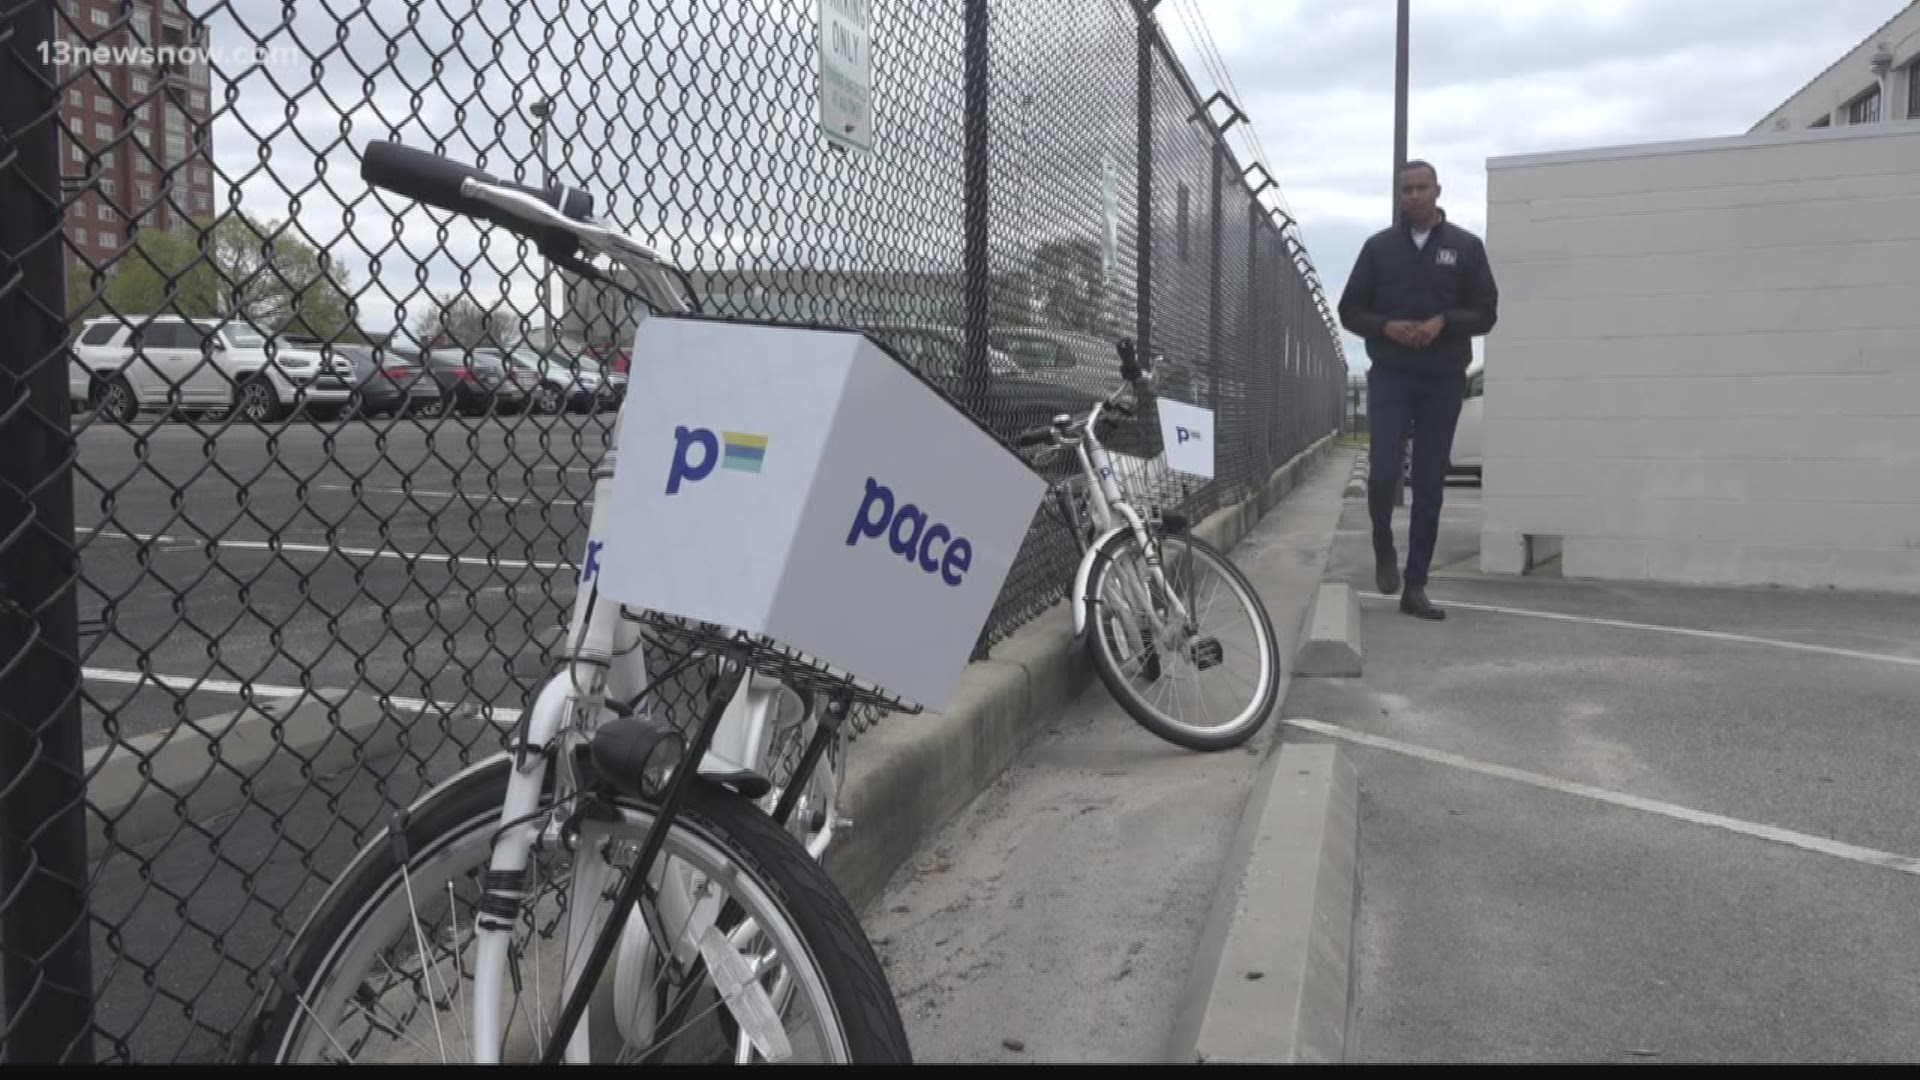 About 10 days into Norfolk's Bike Share program and not everyone is following the rules.